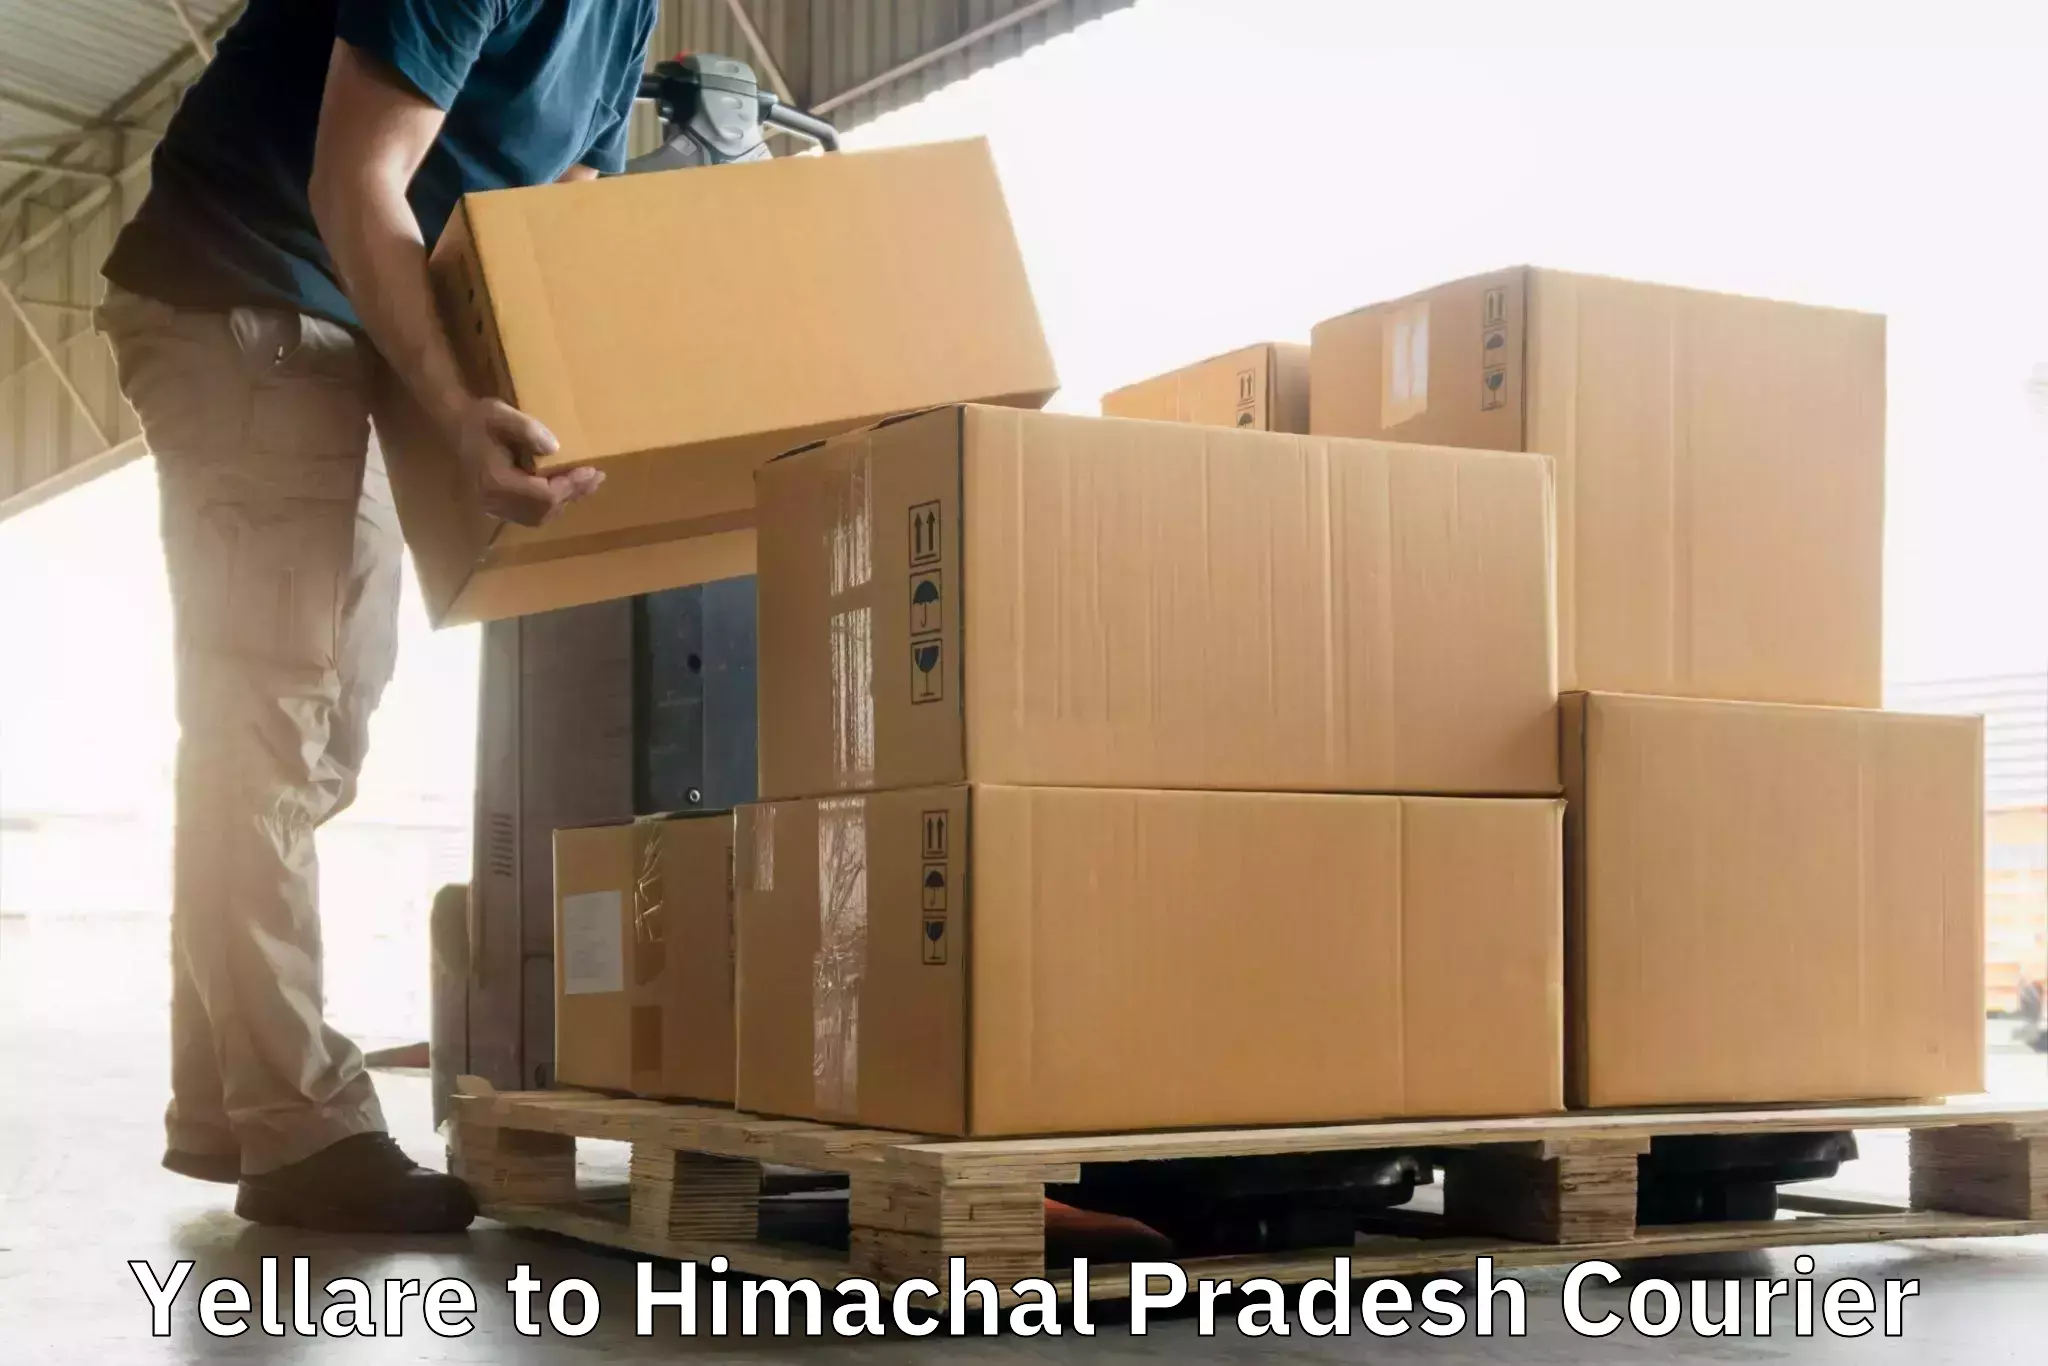 Nationwide courier service Yellare to Dharamshala